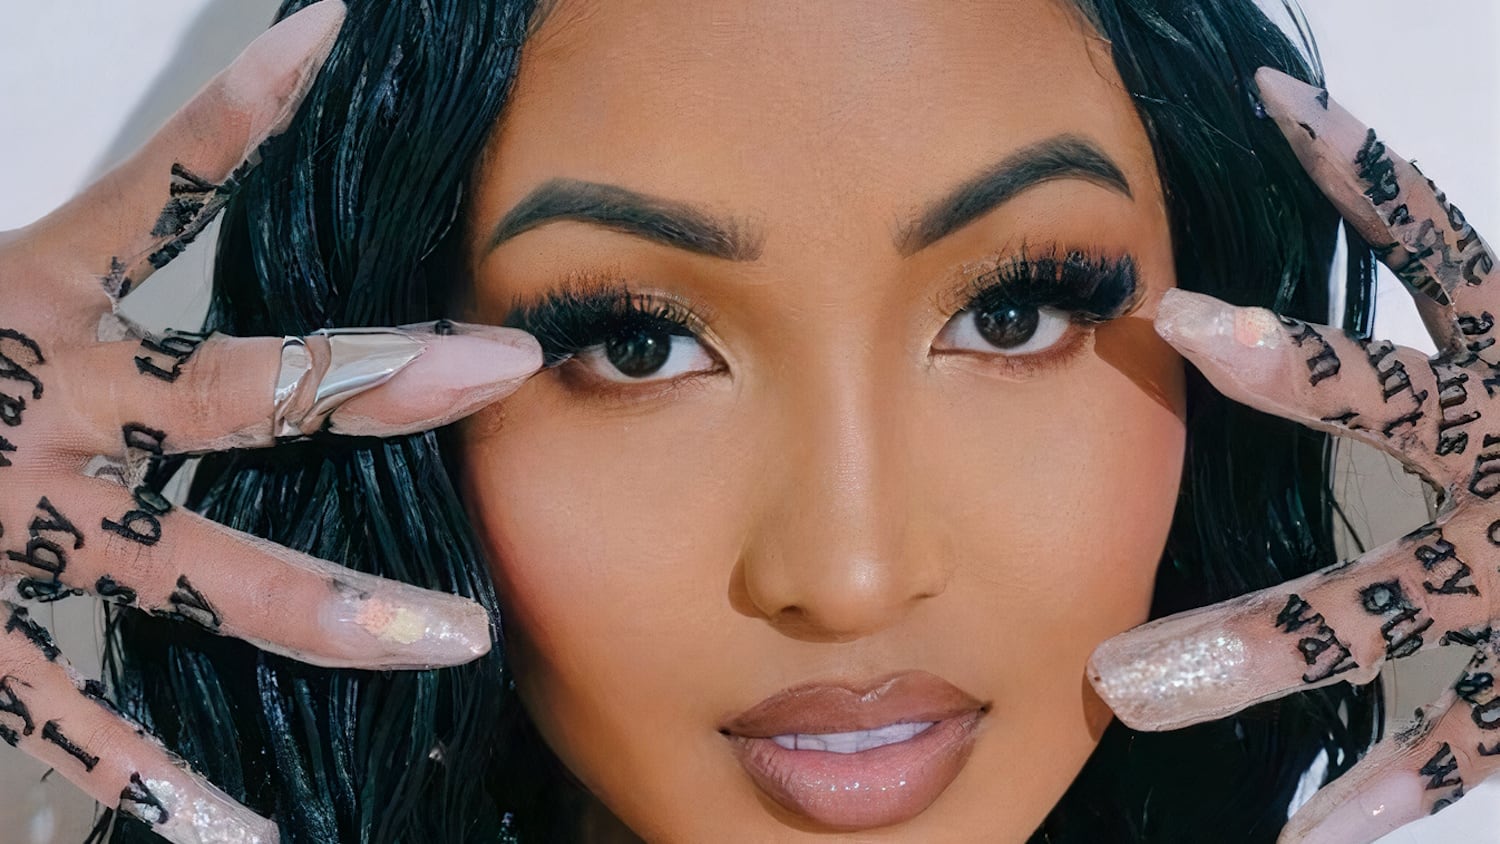 Shenseea Launches Online Merch Store With ‘Alpha' & ‘Lick' Apparel Collections